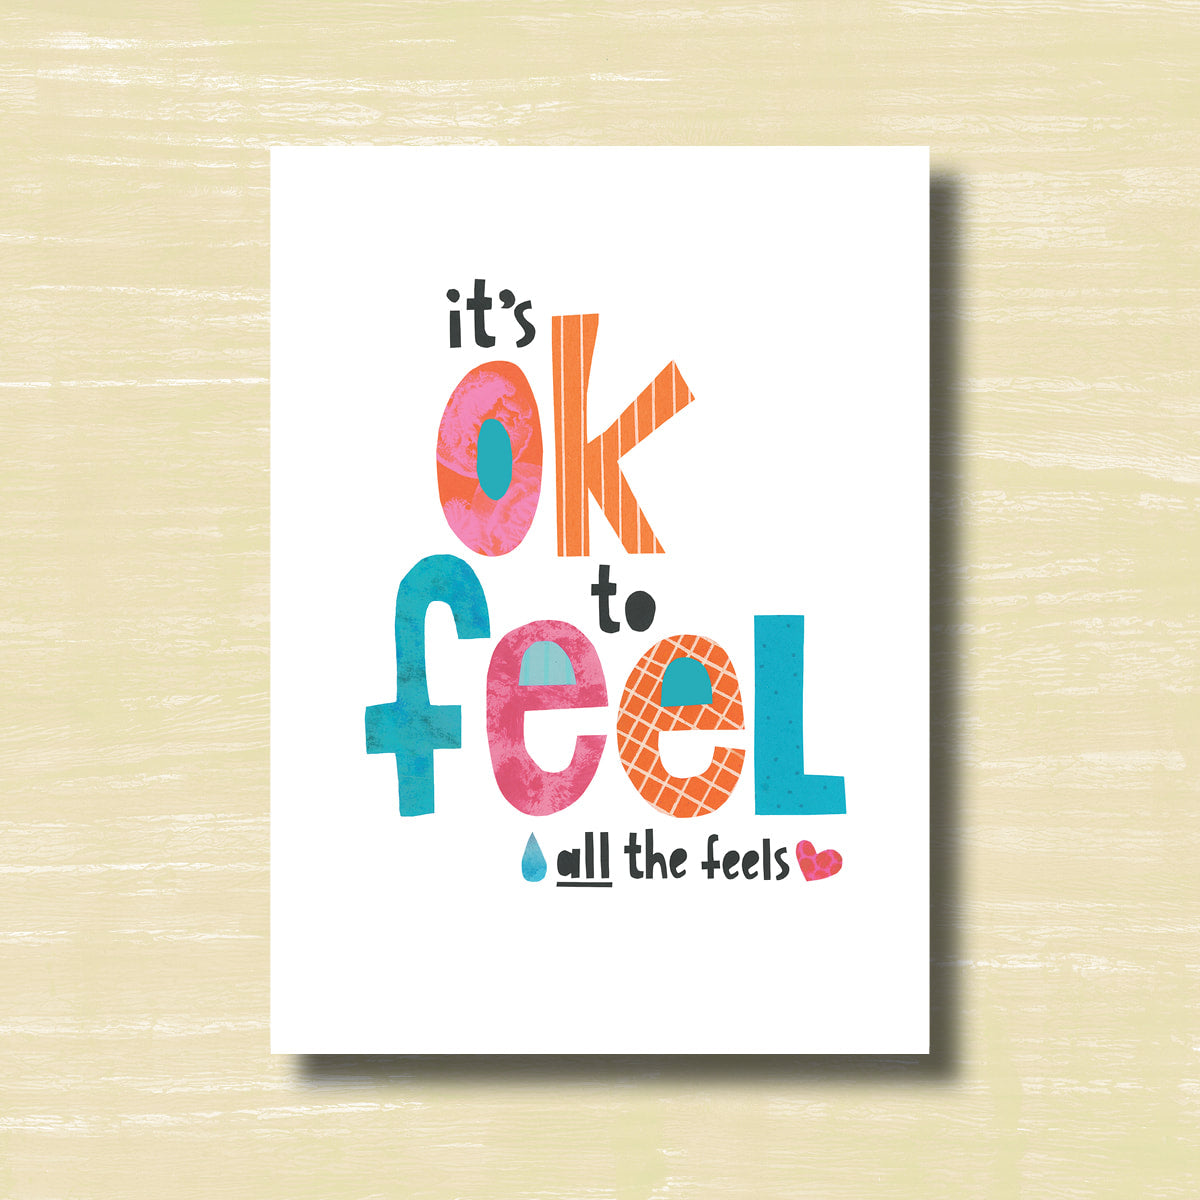 It's OK to Feel - Greeting Card